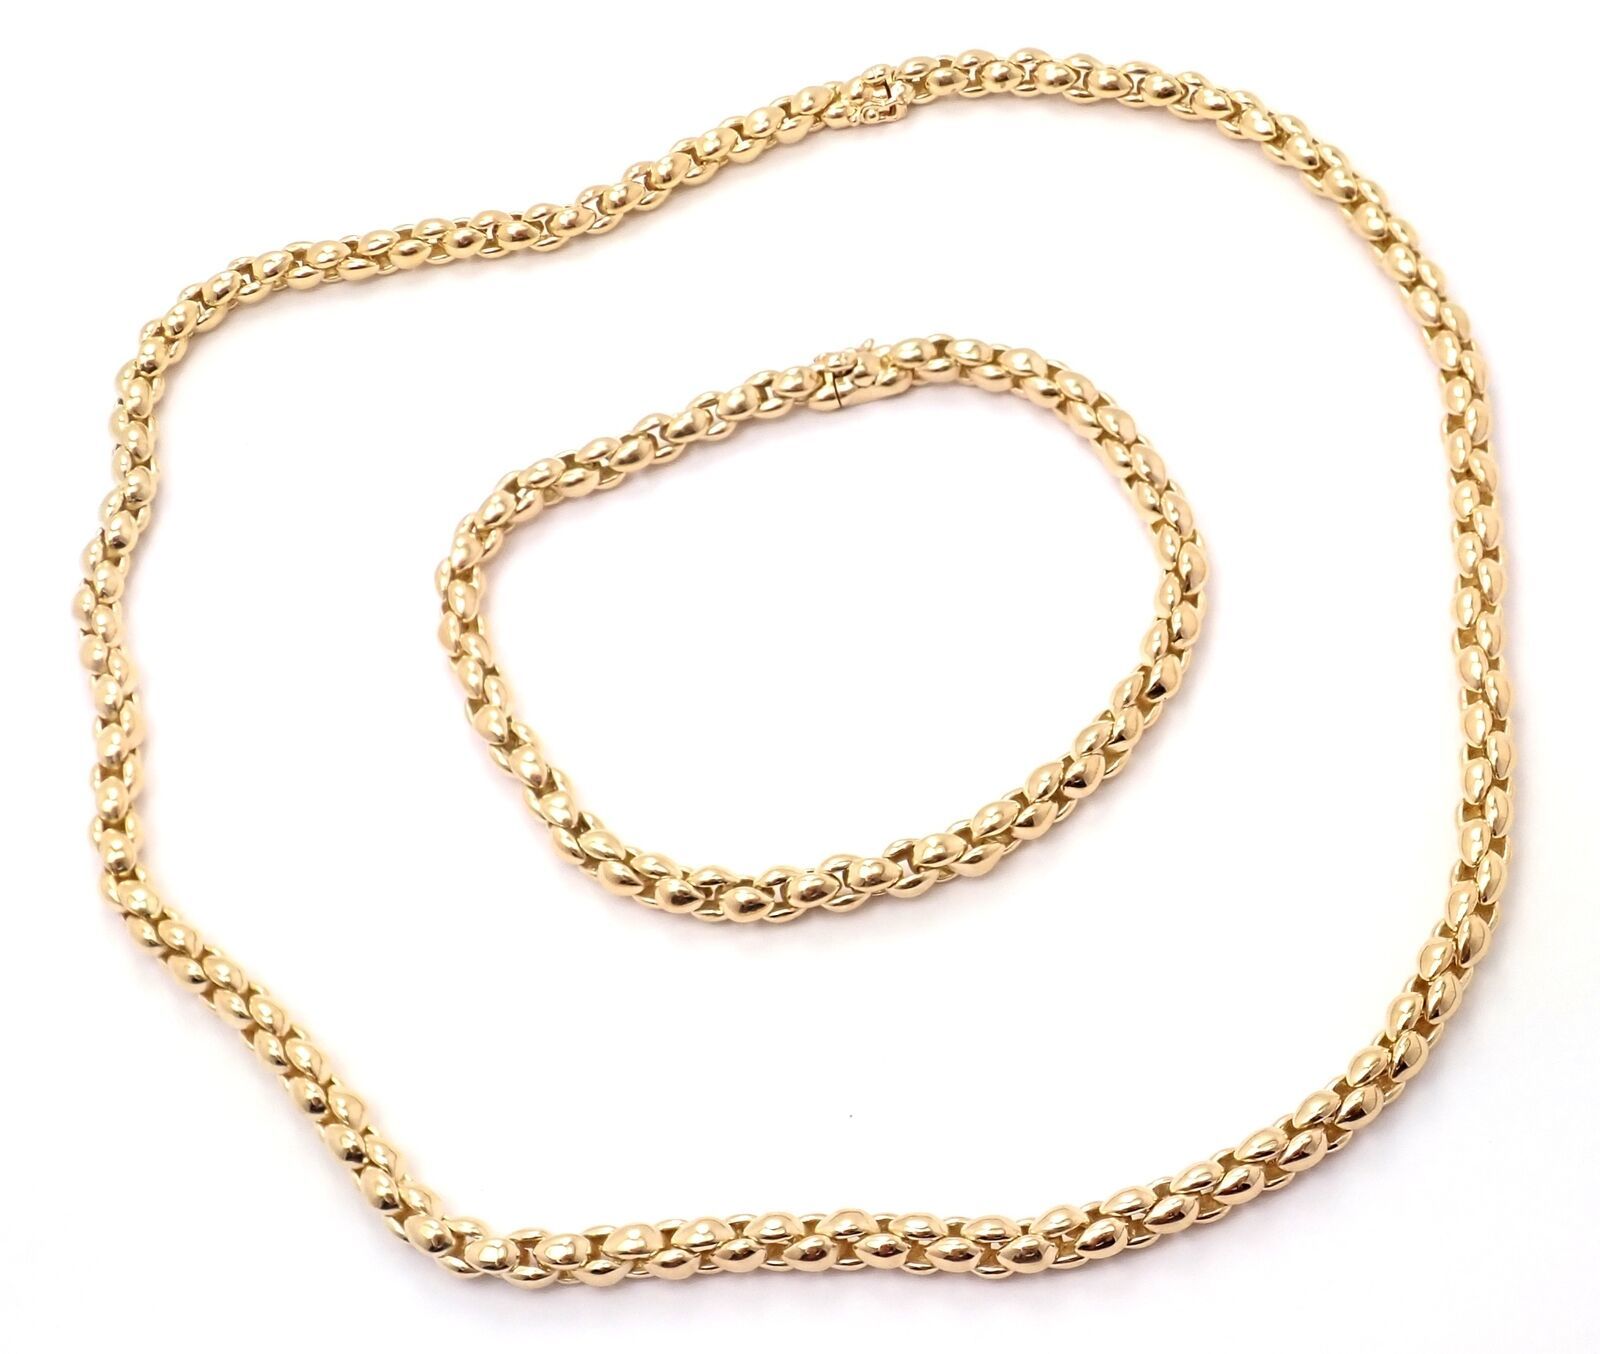 Authenticity Guarantee 
Rare! Vintage Cartier 18k Yellow Gold Chain Necklace ... - $14,000.00